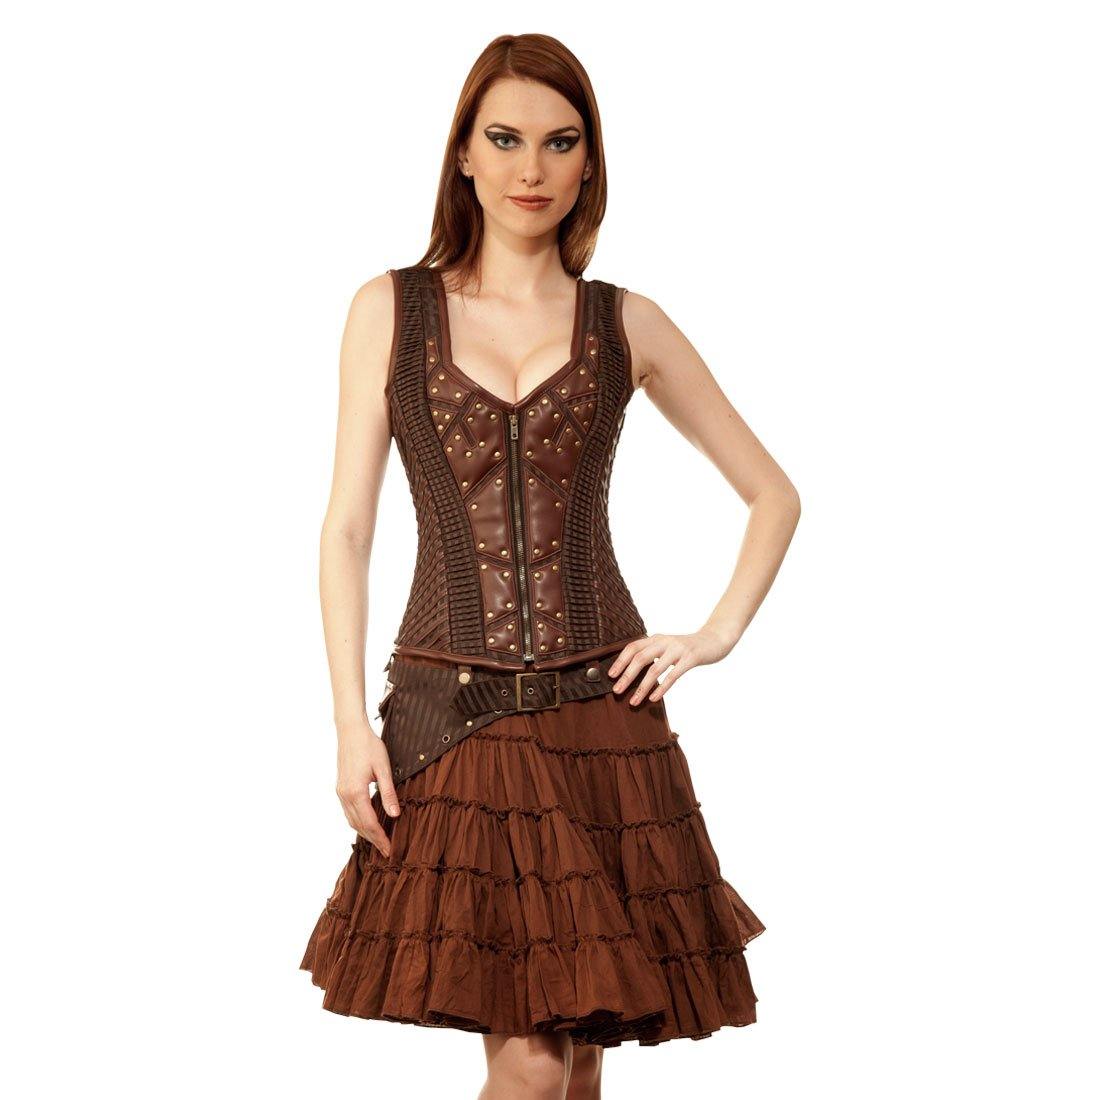 Imperial Princess Steampunk Dress with Steel Boned Corset – Made